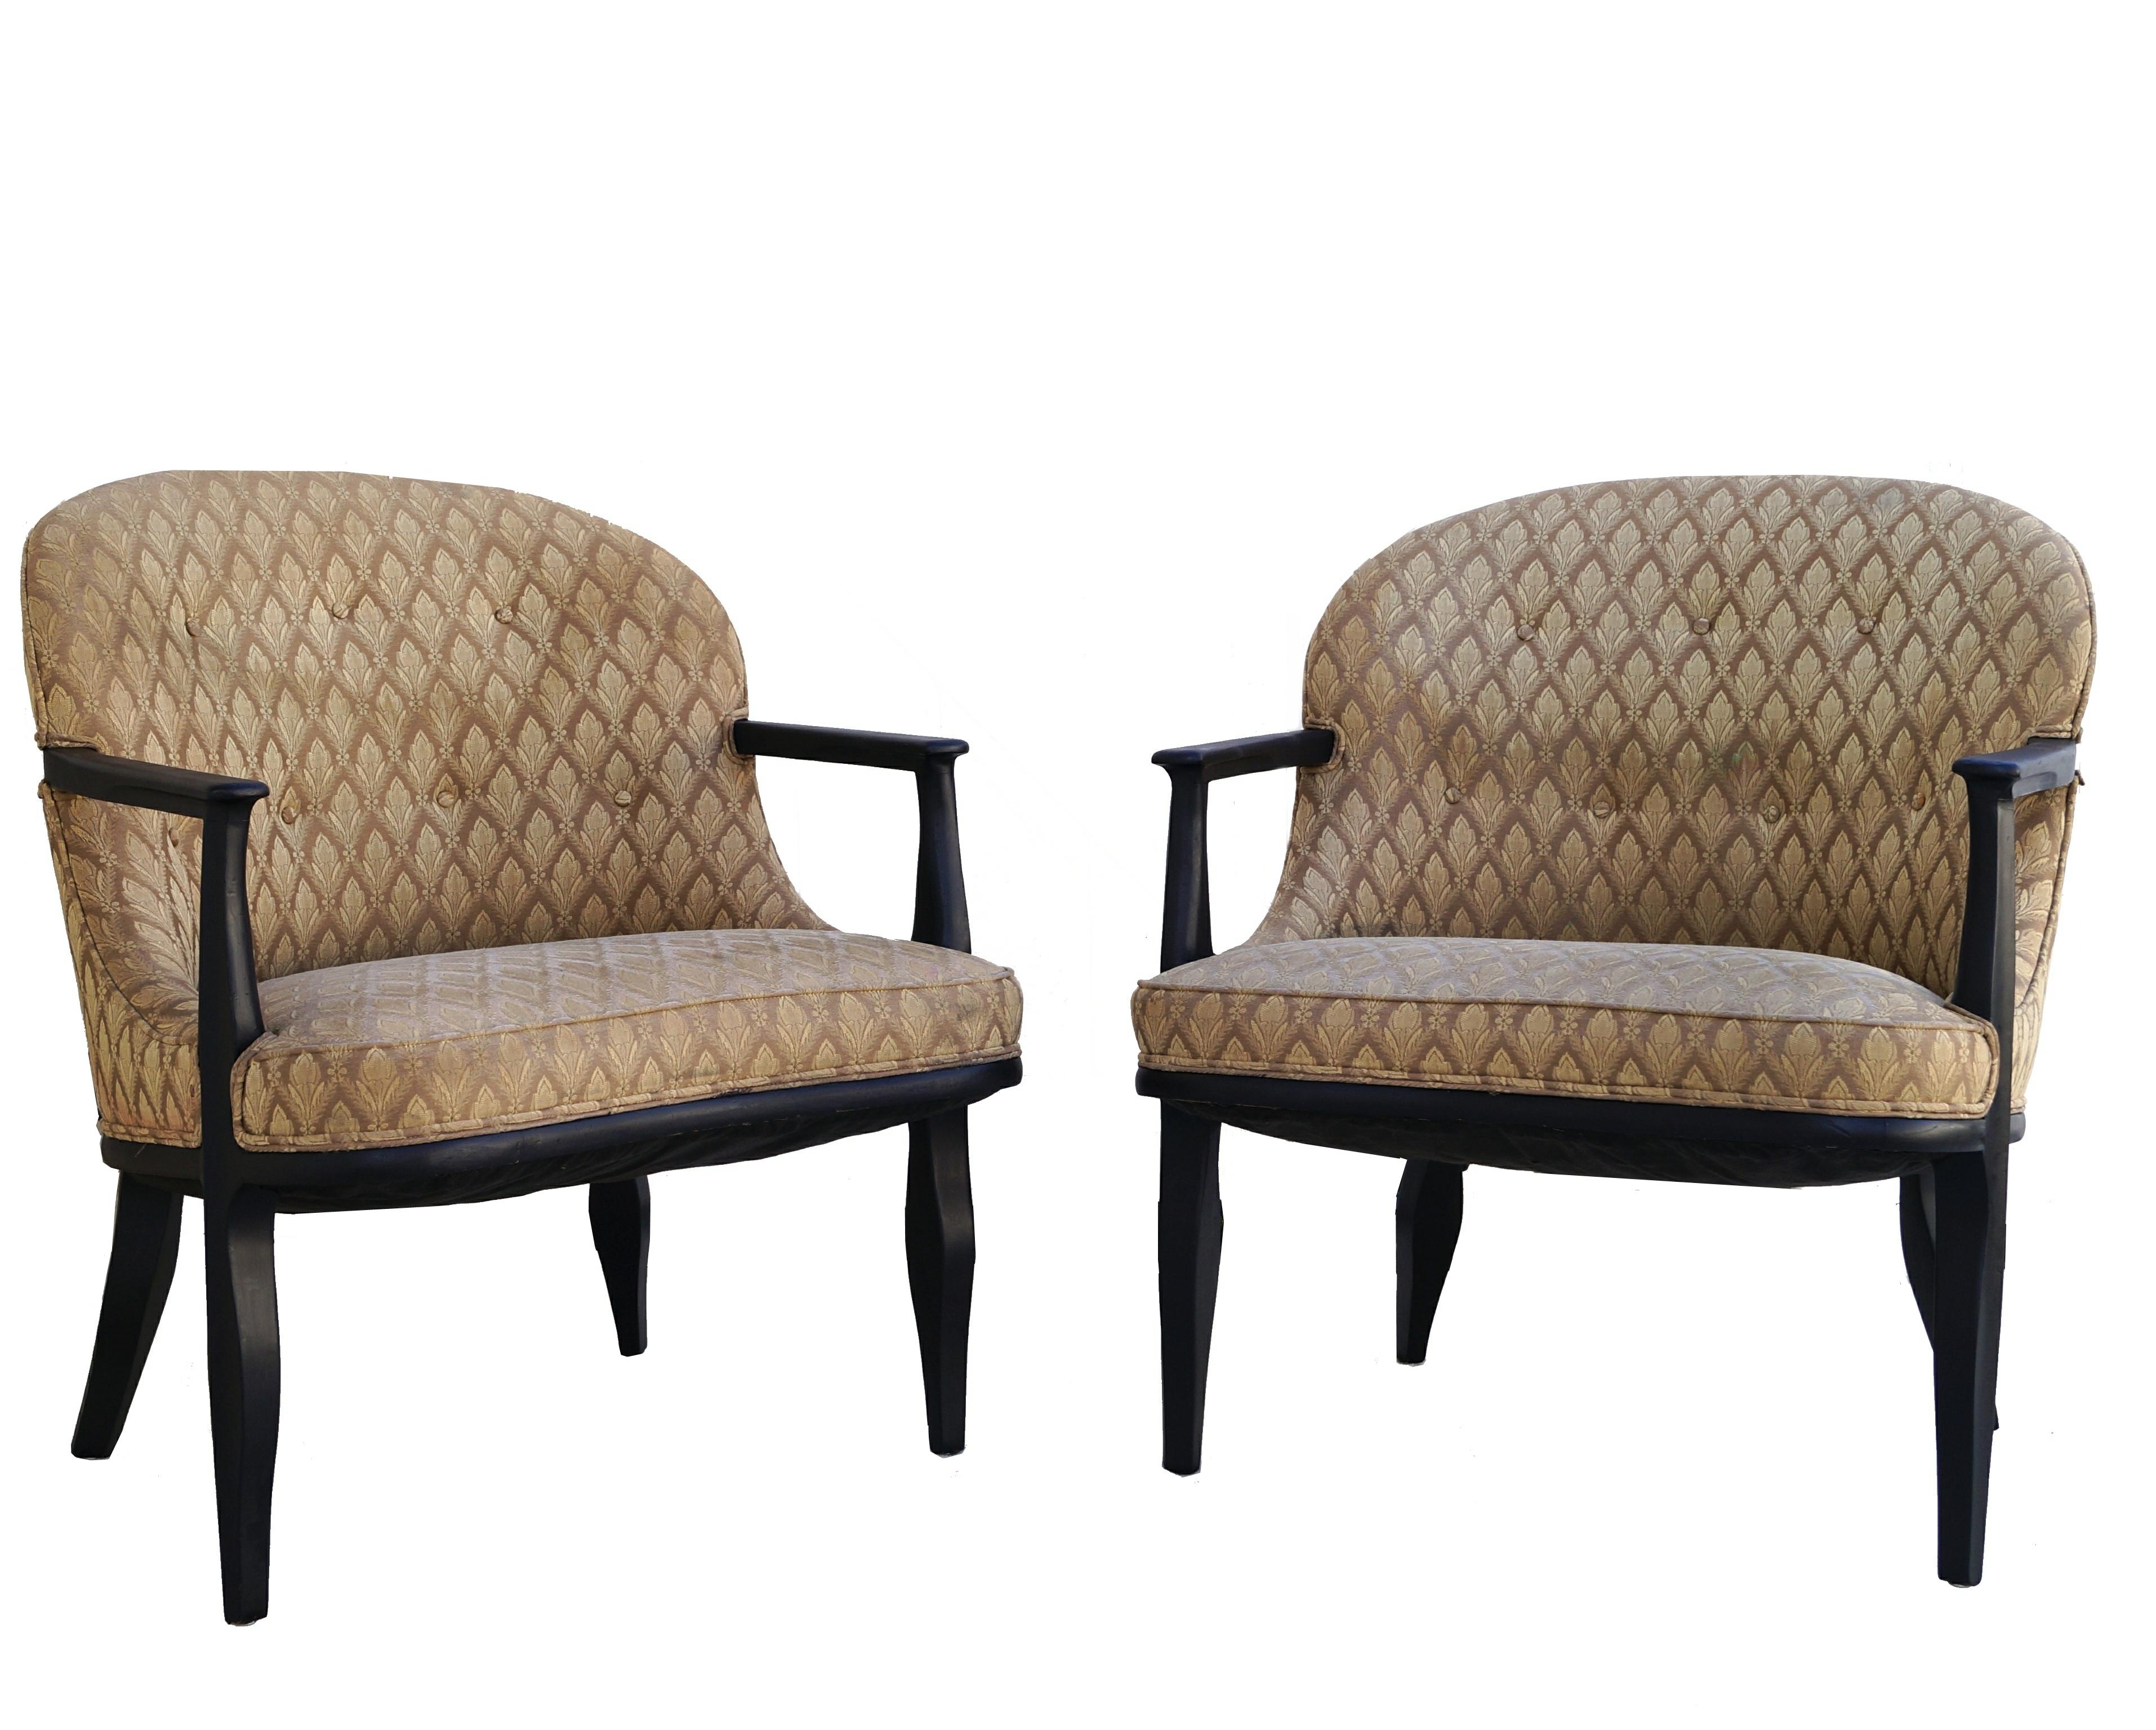 A set of 2 Edward J. Wormley Janus lounge chairs for Dunbar.
If you are in the New Jersey , New York City Metro Area , please contact us with your delivery zipcode, as we may be able to deliver curbside for less than the calculated White Glove rates